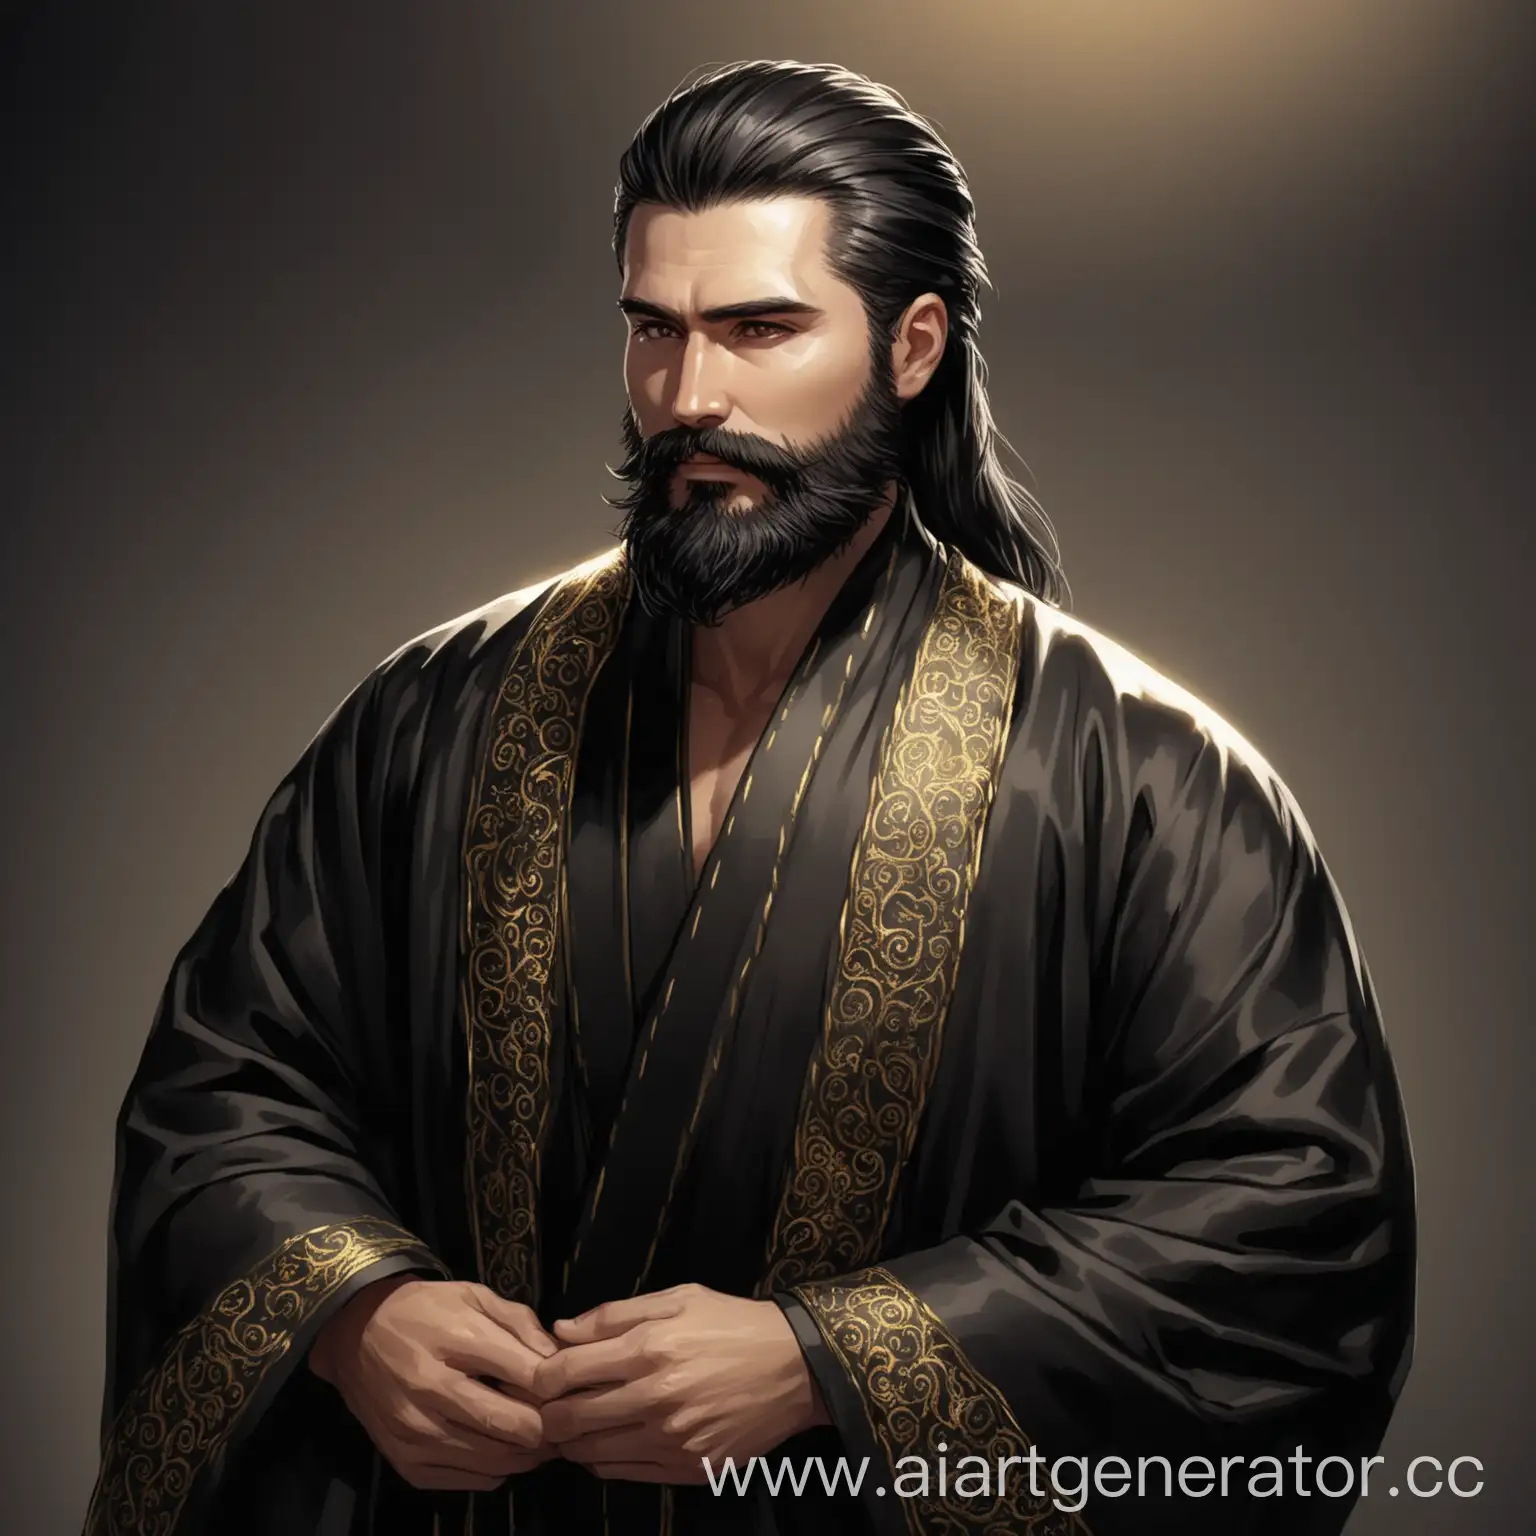 Elegant-Man-in-Black-GoldSewn-Robe-with-Neat-Beard-and-Combed-Back-Hair